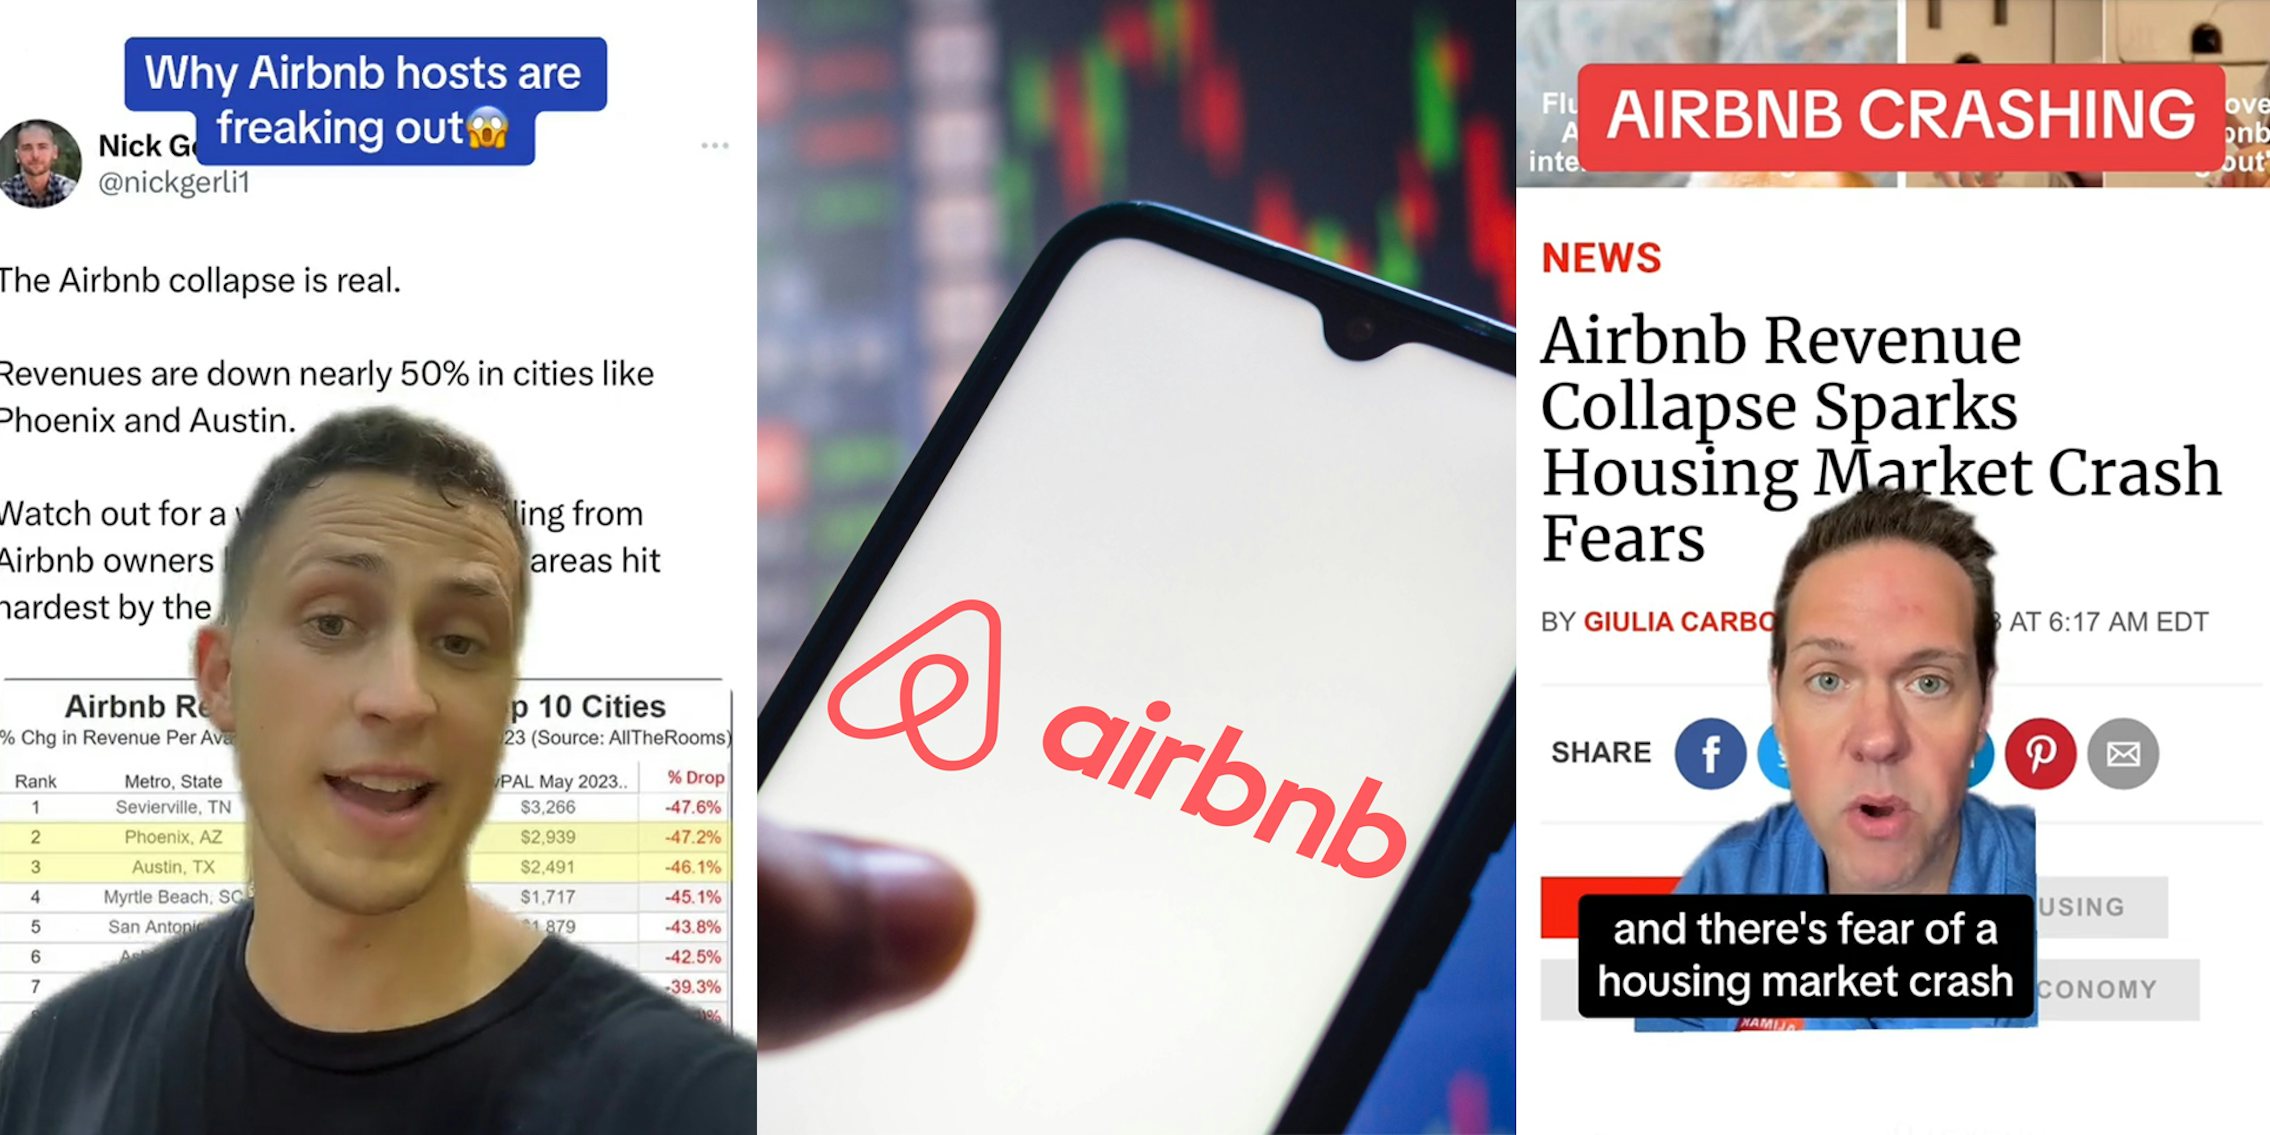 man greenscreen TikTok over image of Airbnb collapse tweet with caption 'Why Airbnb hosts are freaking out' (l) hand holding phone with Airbnb on screen in front of chart background (c) man greenscreen TikTok over article 'Airbnb Revenue Collapse Sparks Housing Market Crash Fears' with caption 'and there's fear of a housing market crash' (r)